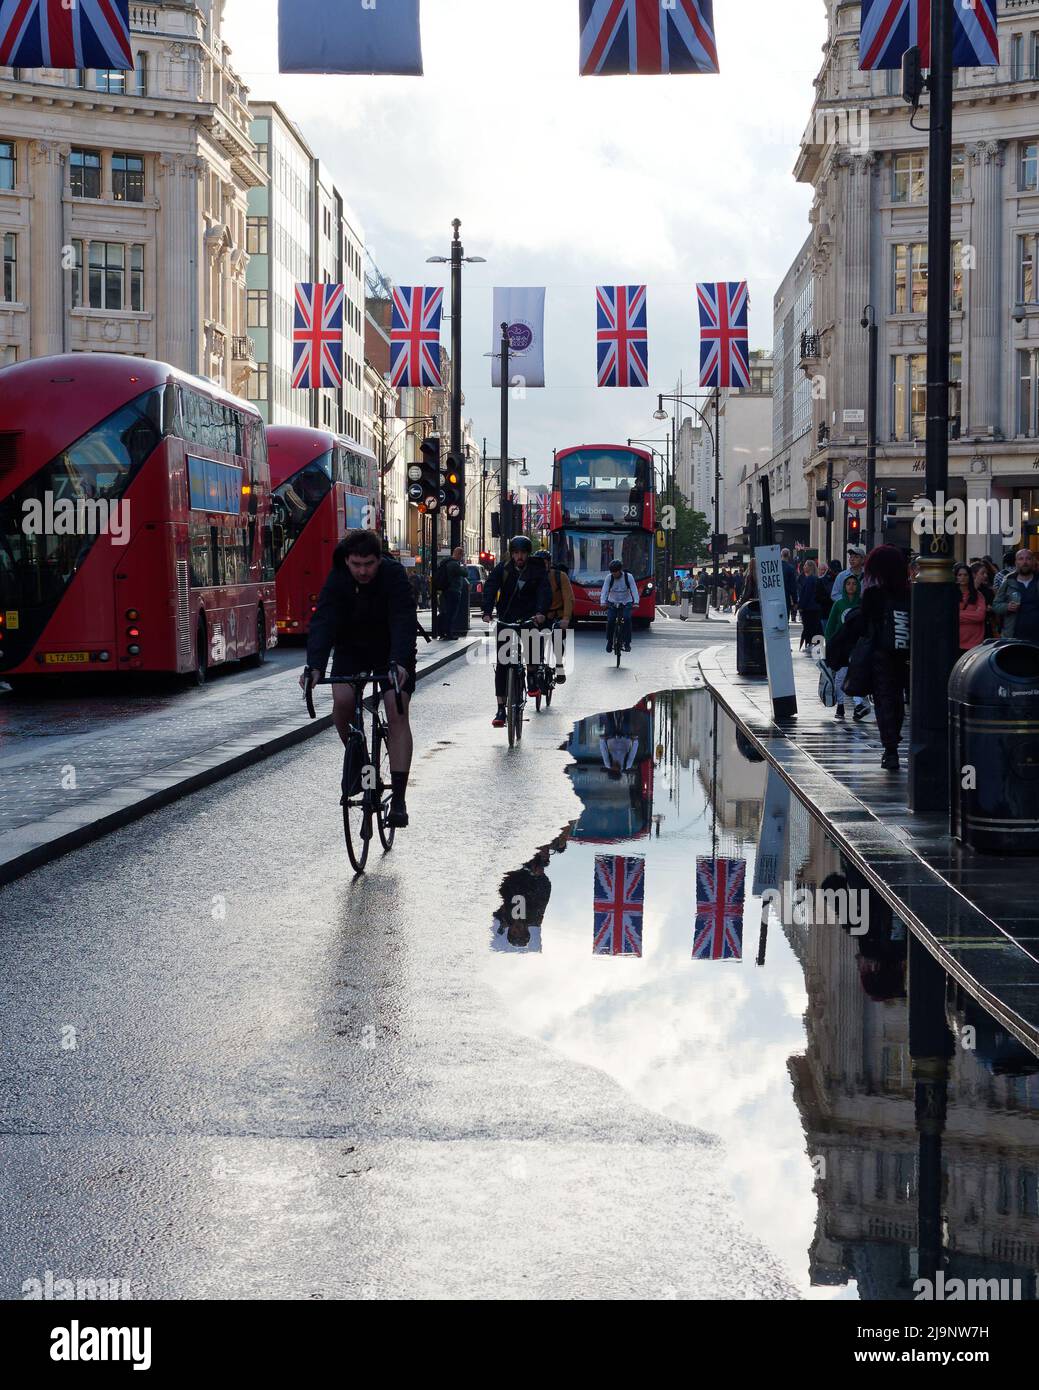 London, Greater London, England, May 11 2022: Cyclists and buses on Oxford Street at Oxford Circus after heavy rain has floods on the road. Stock Photo